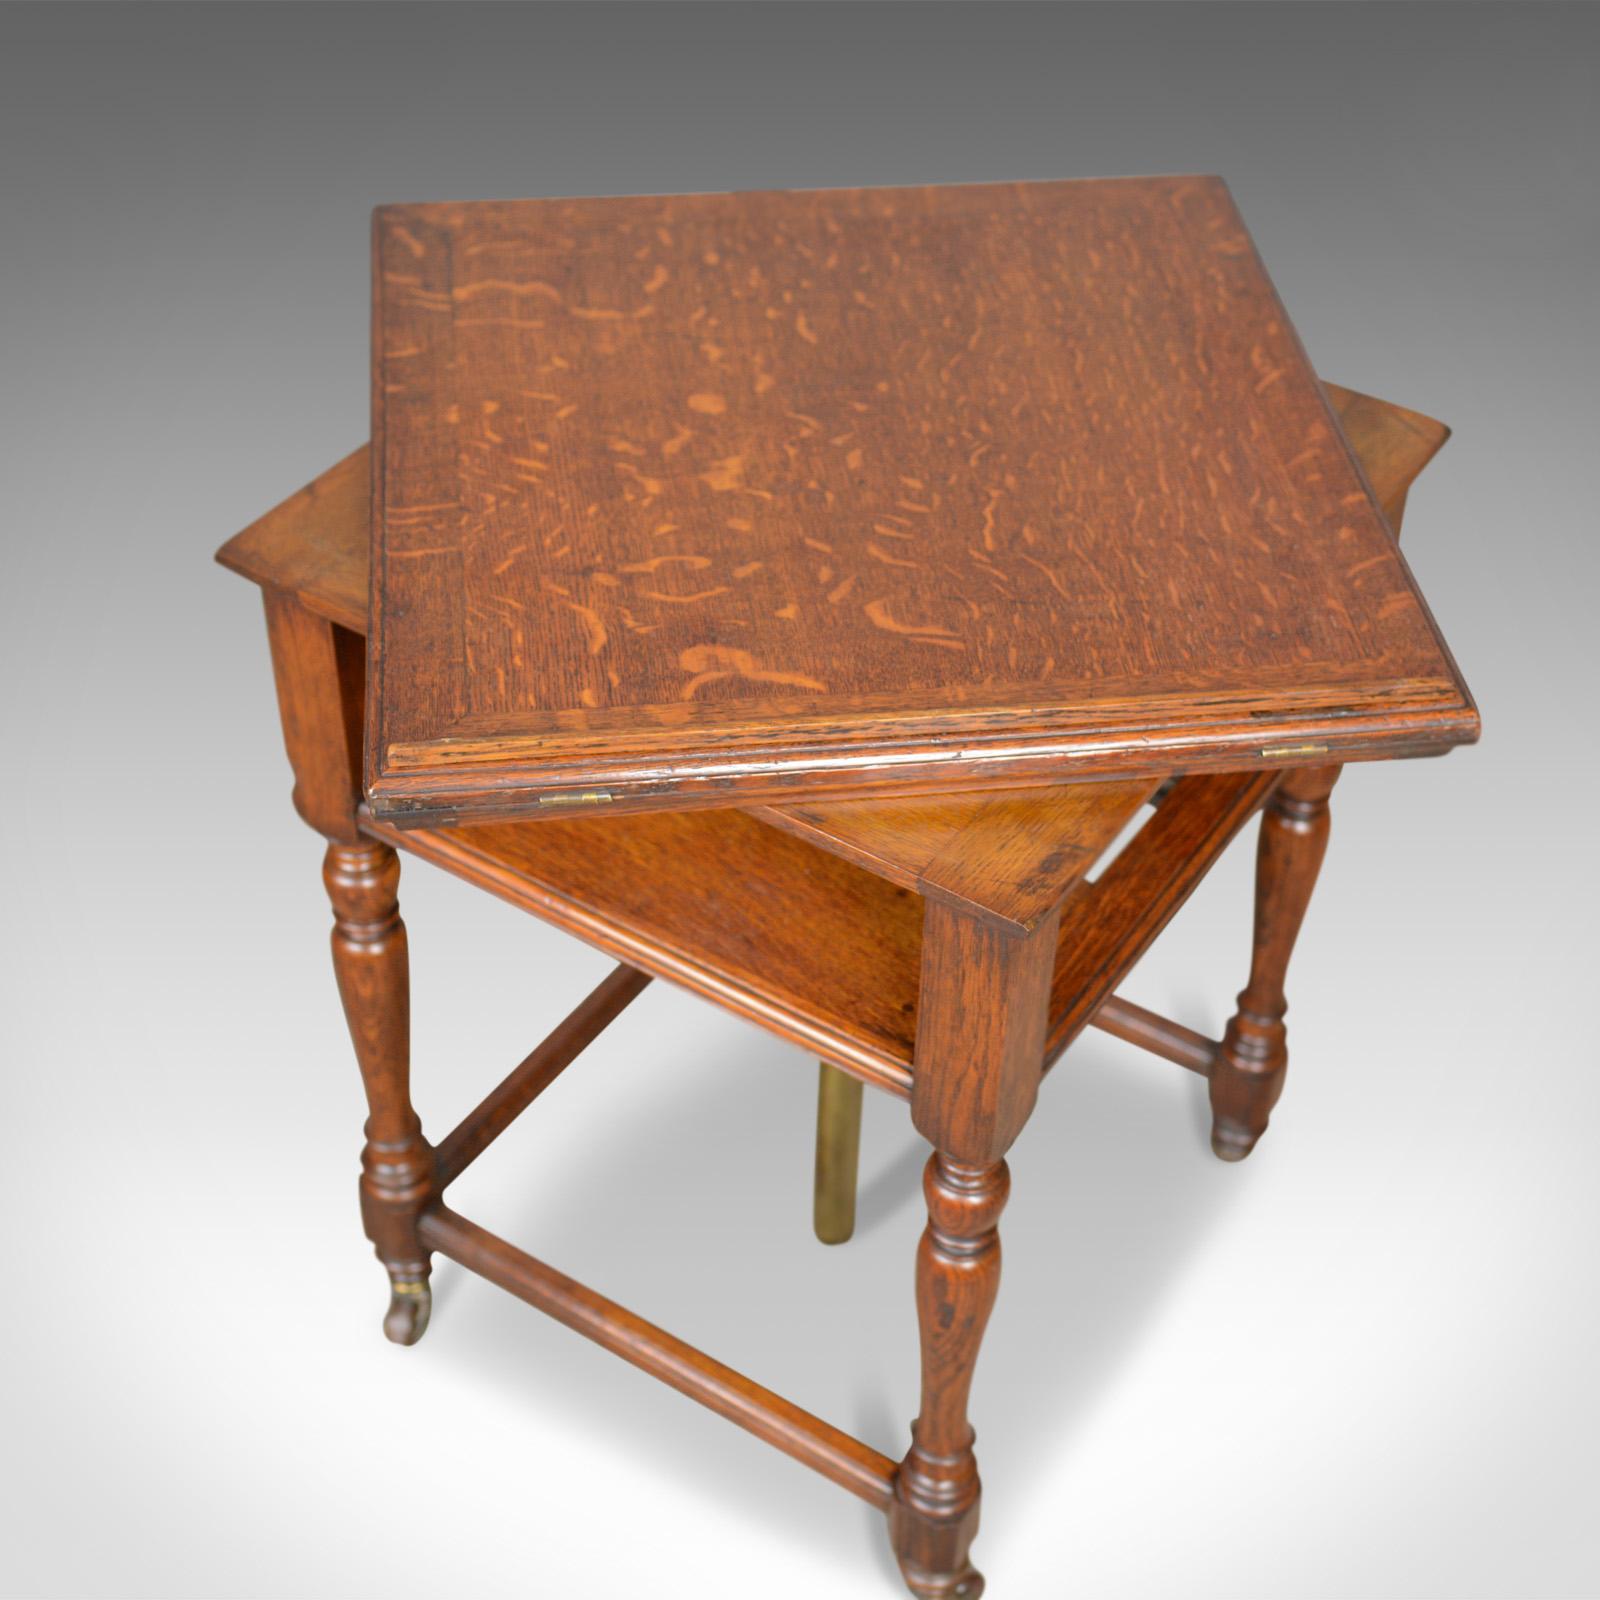 Antique, Metamorphic, Side Table, Lectern, Oak, Library, Reading, circa 1860 1